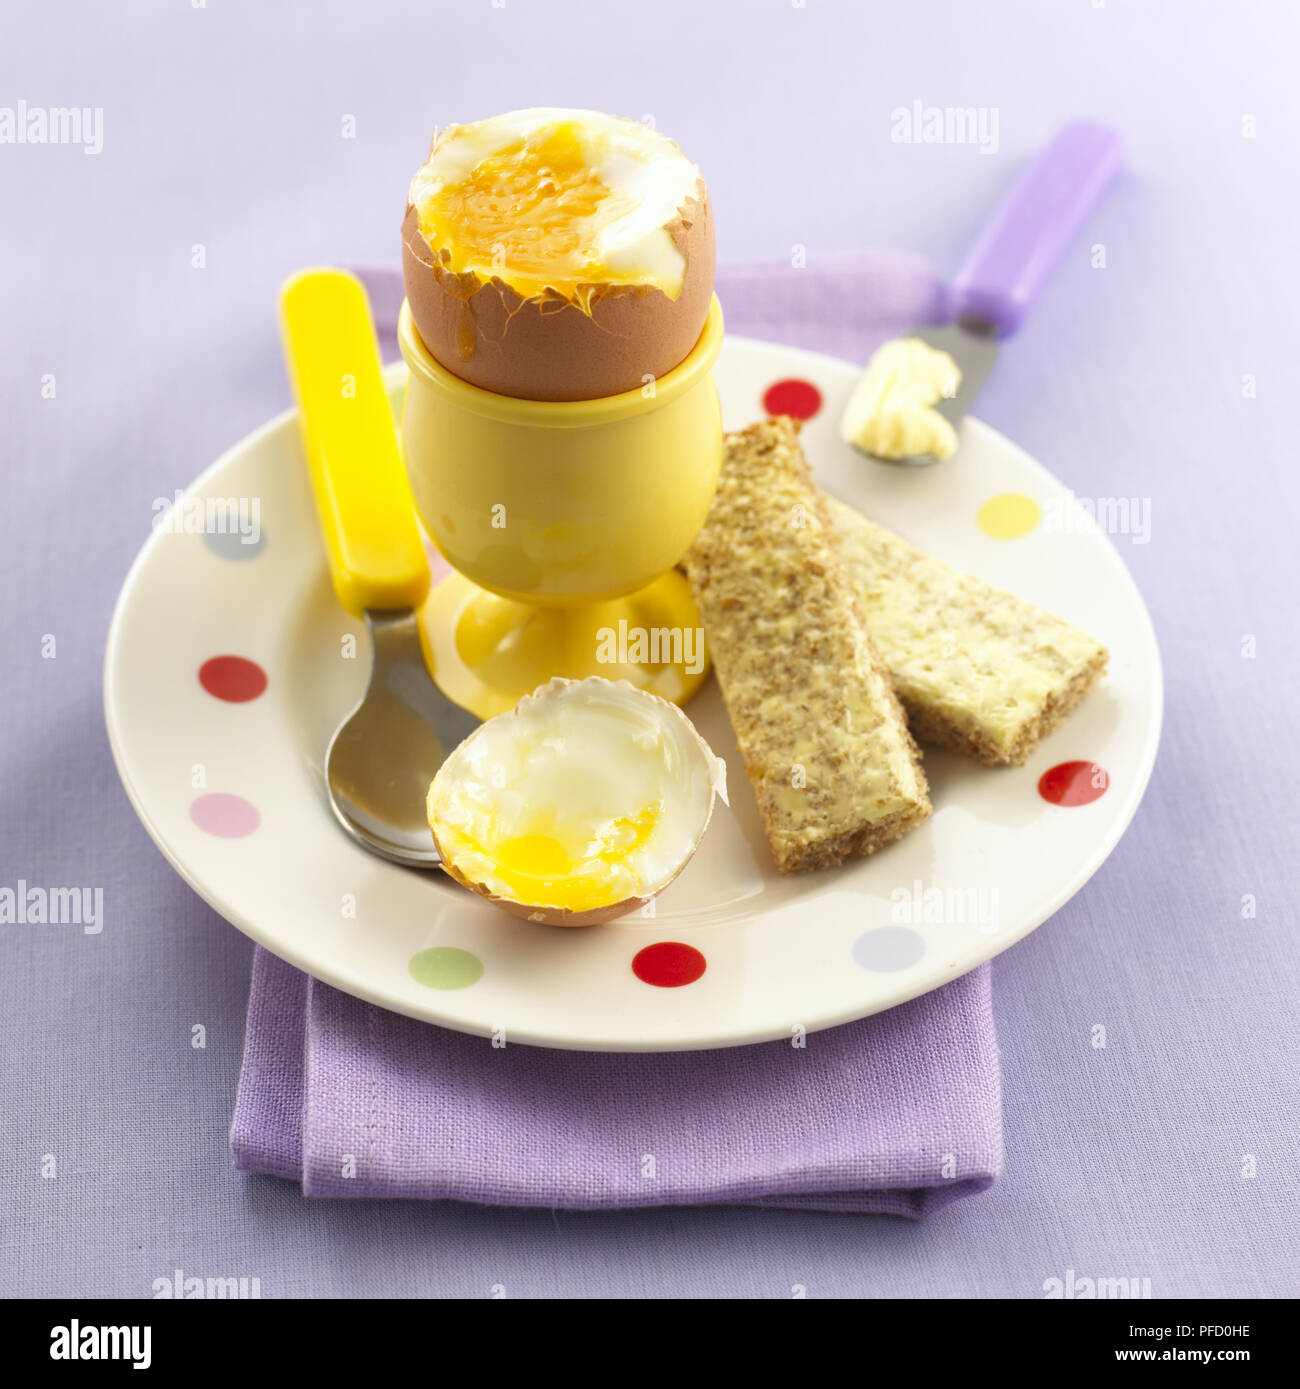 Soft-boiled egg in an egg cup, removed top, spoon and bread 'soldiers' on the side, close up. Stock Photo